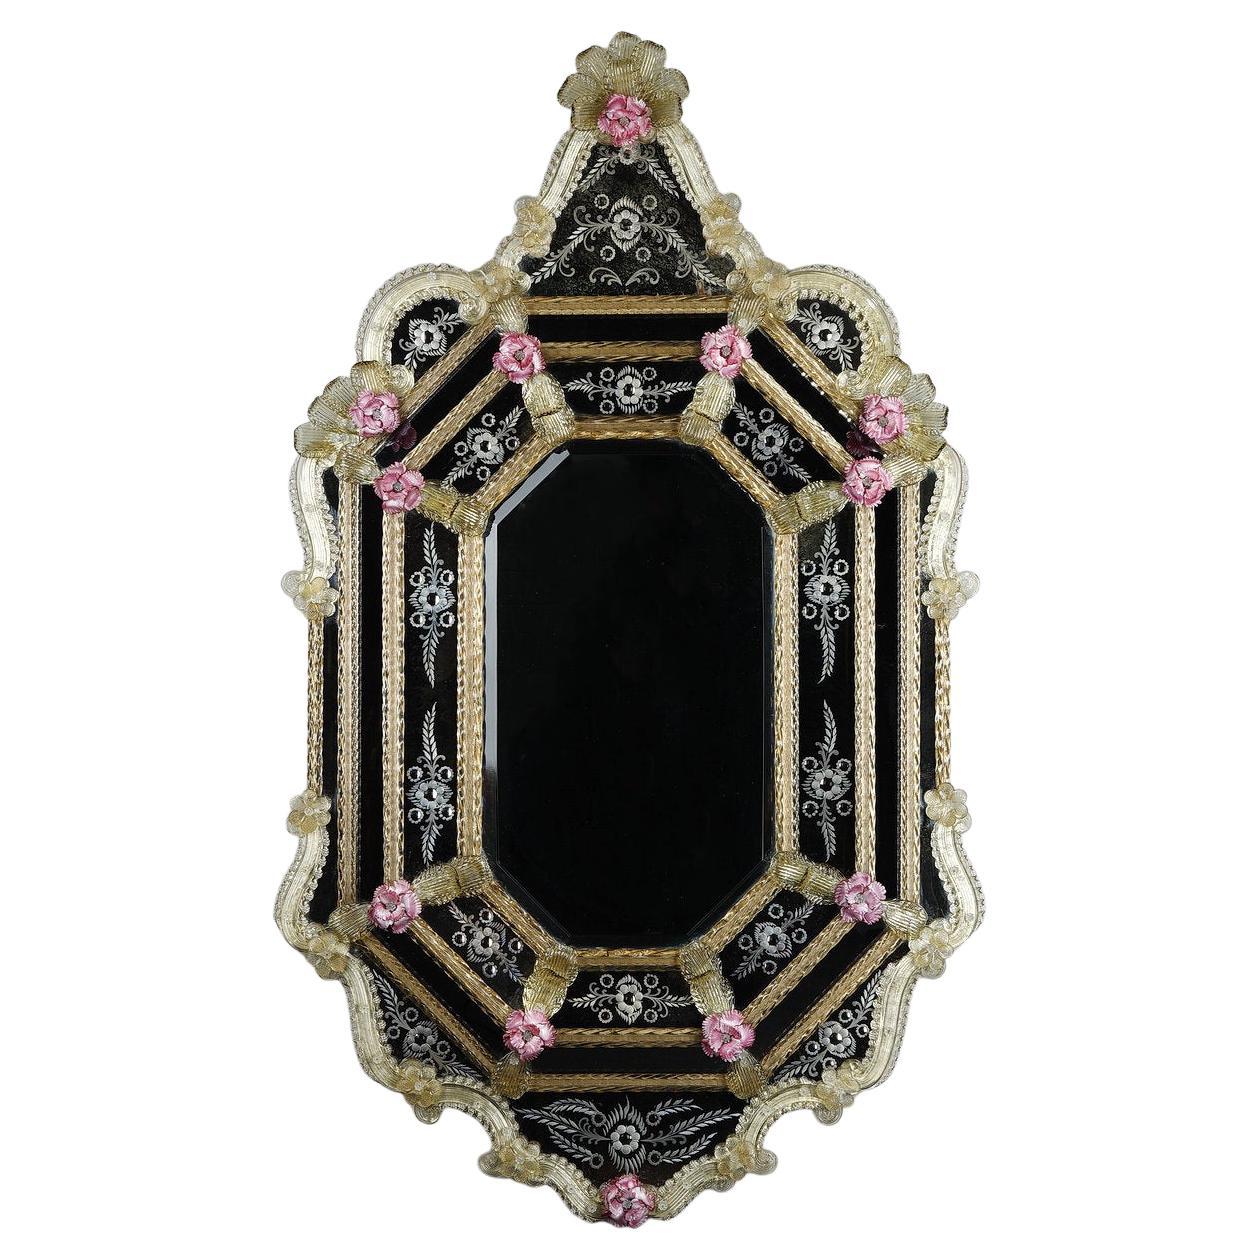 Octagonal Mirror with Murano Glass Beads, Early 20th Century